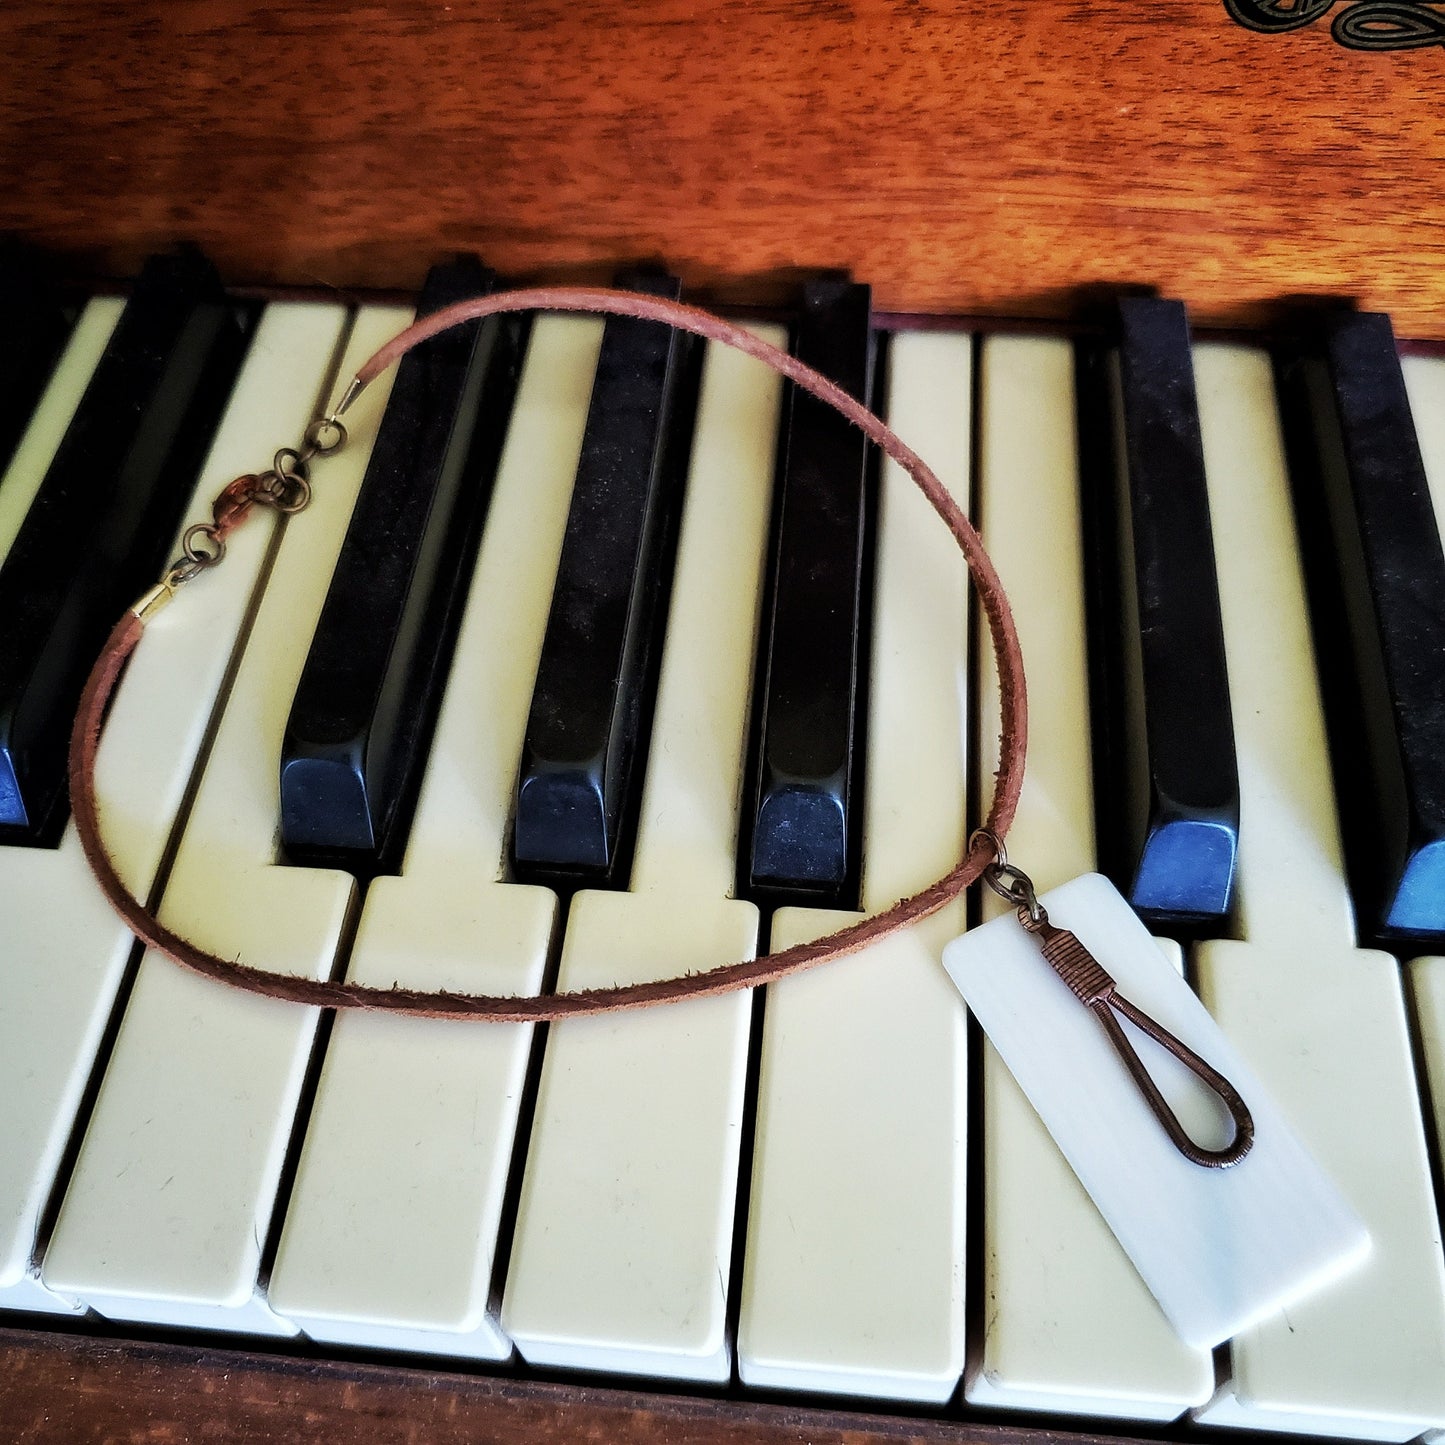 necklace made from an upcycled ivory piano key topper and a teardrop shaped upcycled piano string both hanging on a brown suede chord - necklace is on piano keys